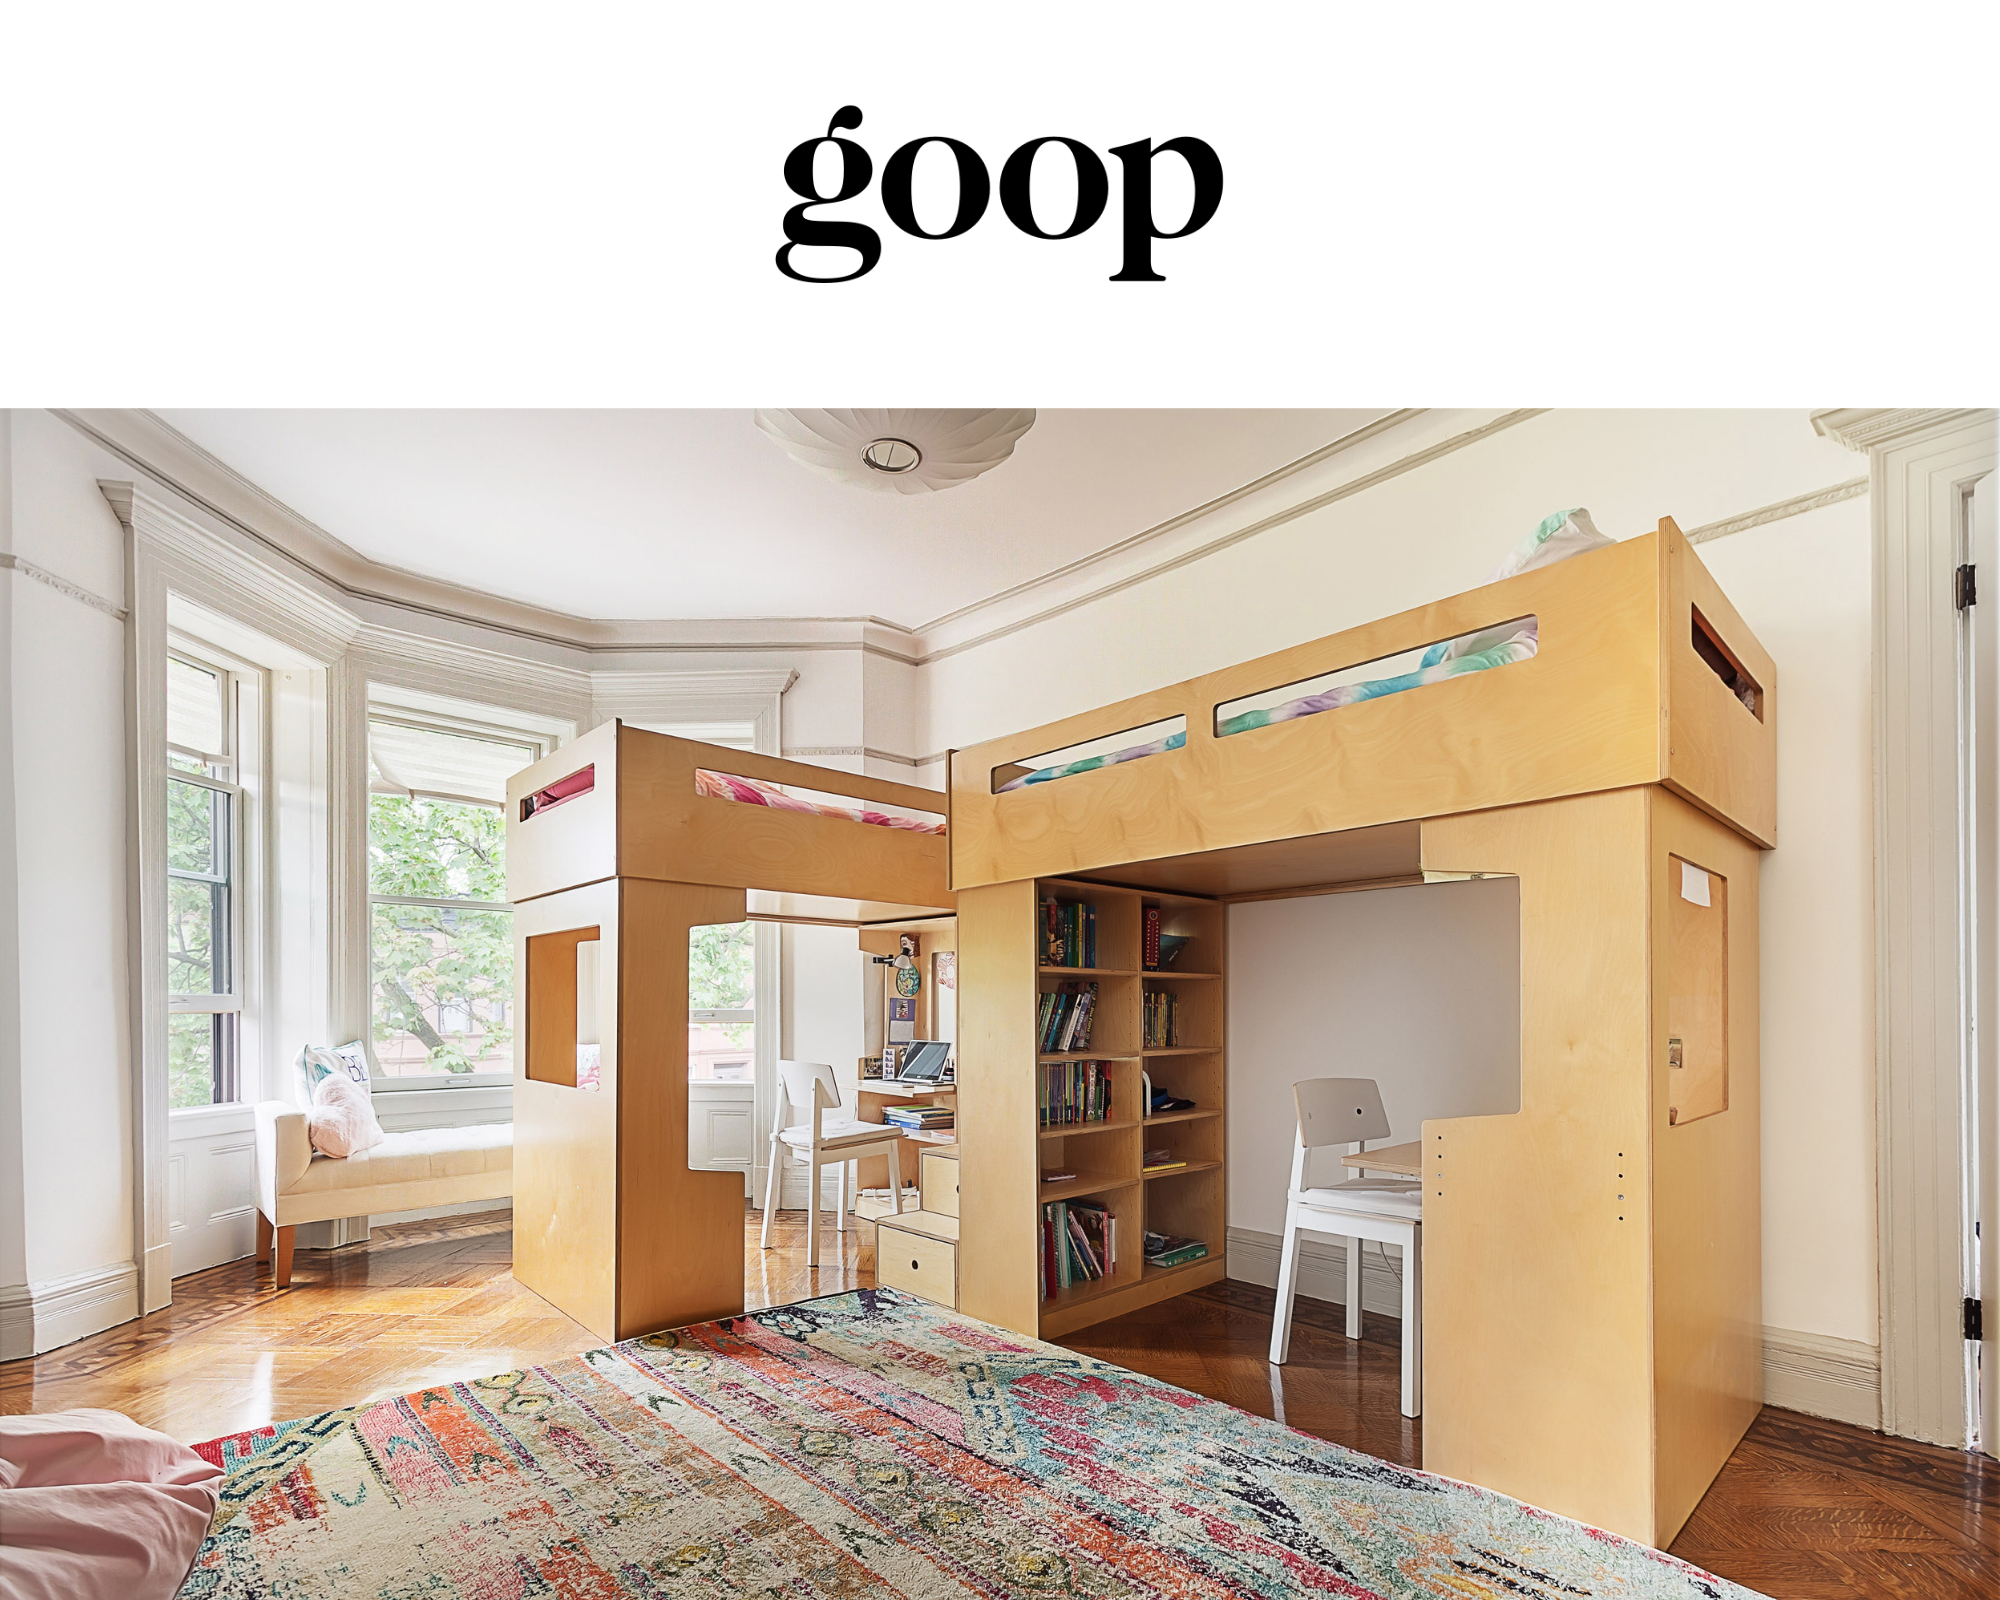 Room with bed, rug, loft with desk, shelves, and “goop” sign.